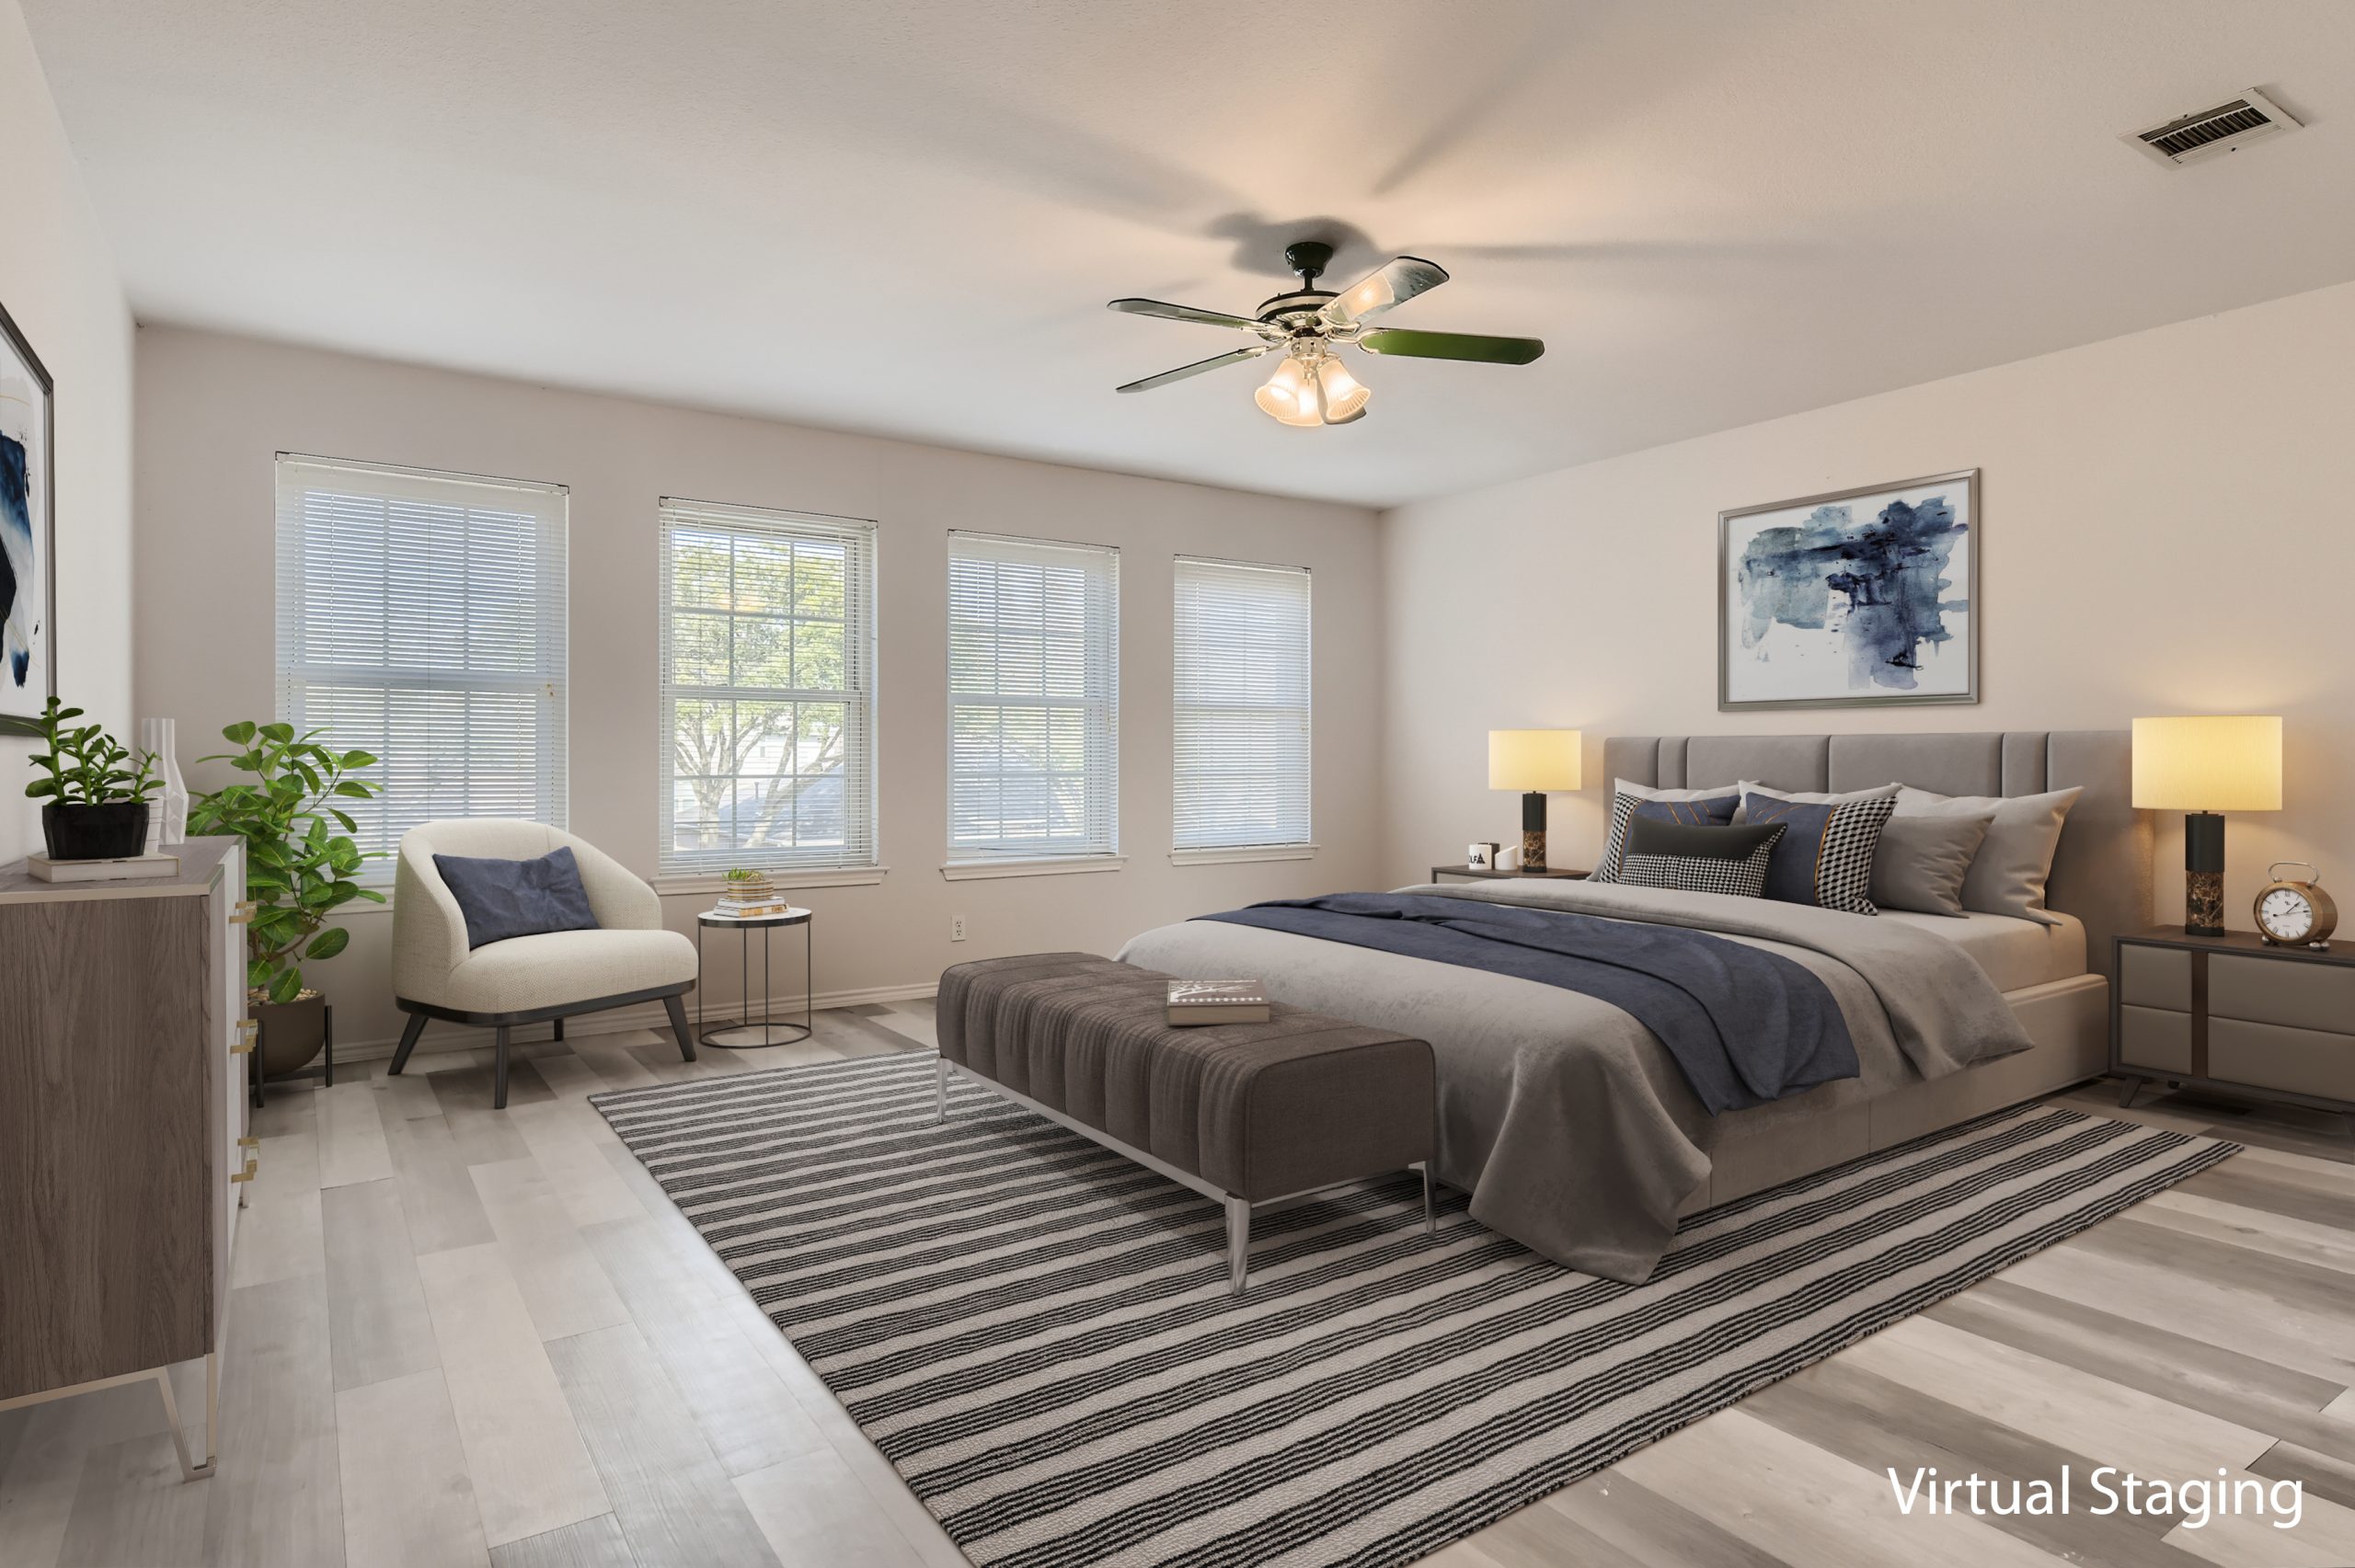 digital furniture added to vacant bedroom compliant for mls to show how virtual staging works